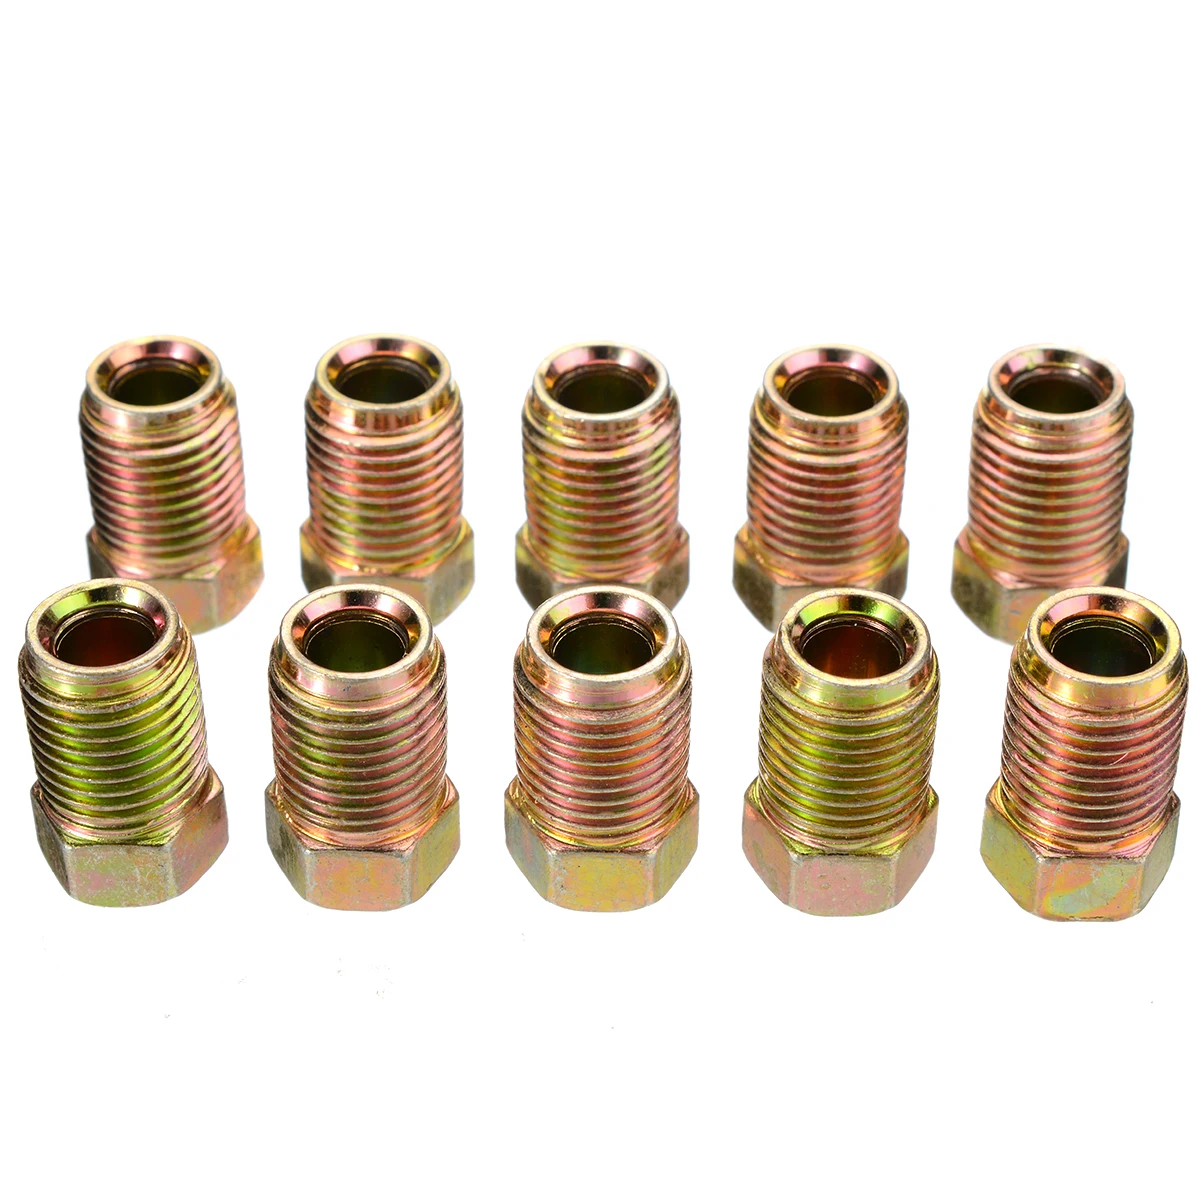 New Arrival 10Pcs/Set 10mm x 1mm Male Short Brake Pipe Screw Nuts For 3/16 Inch Metric Braking Tubes Nuts Bolts images - 6